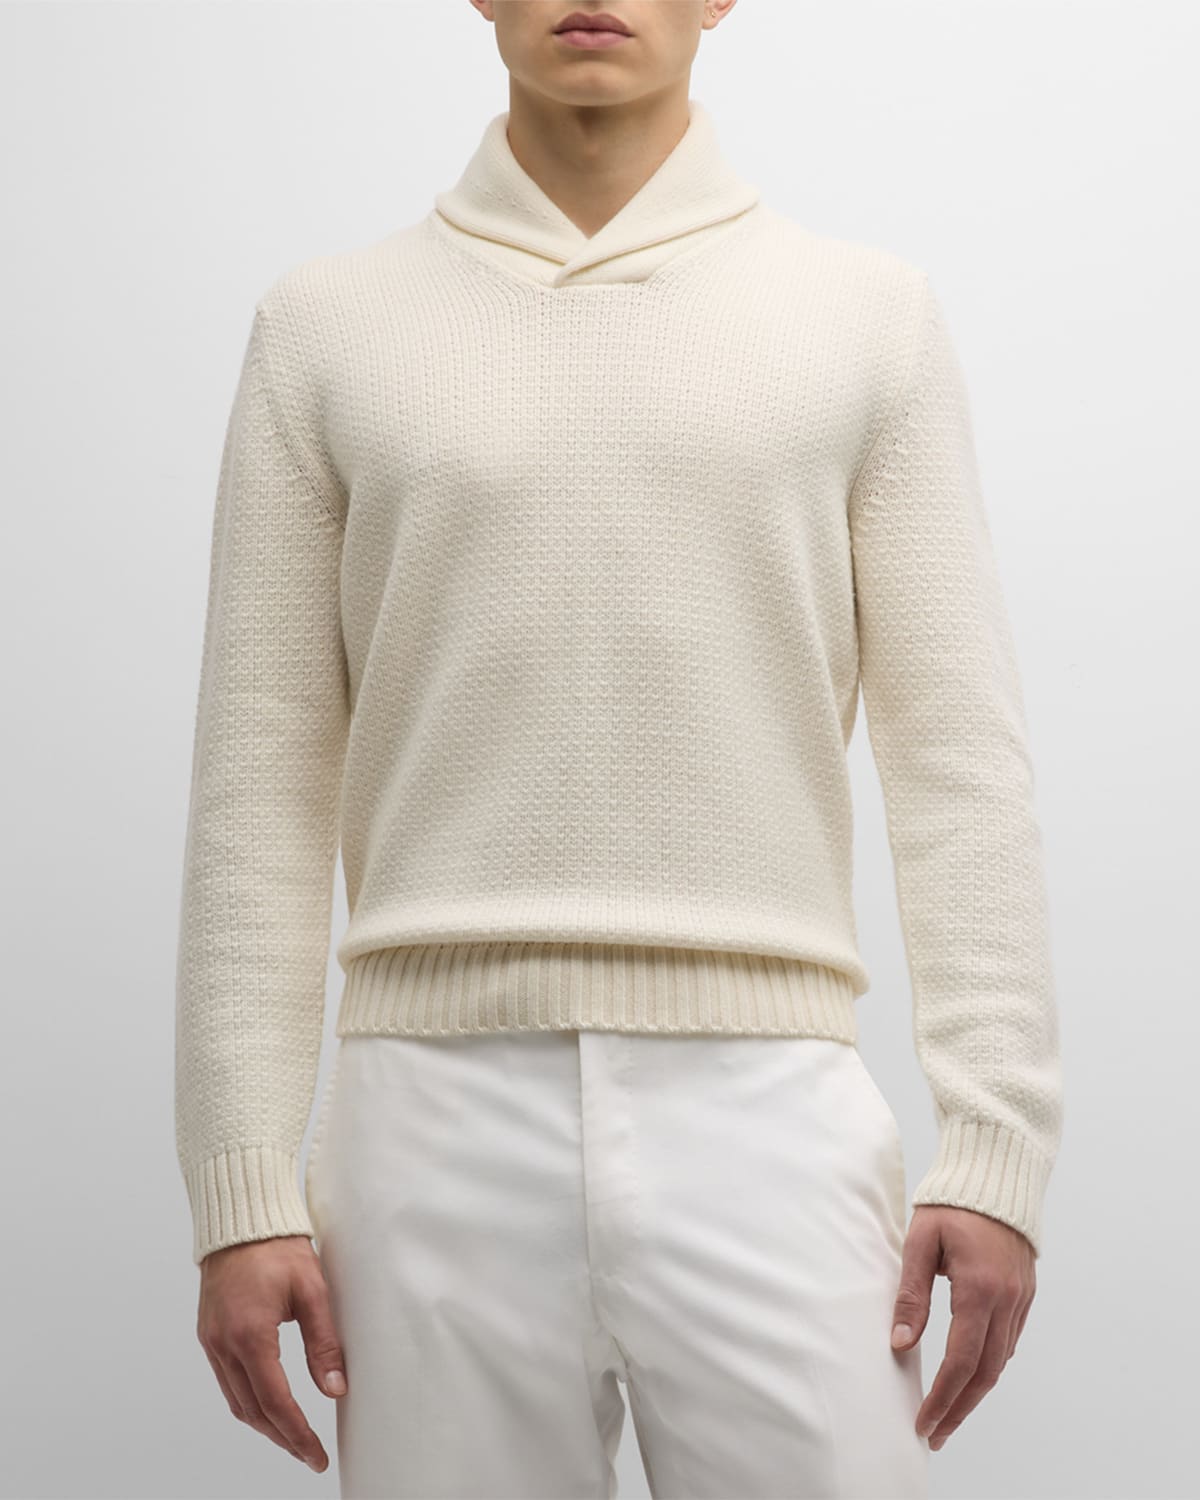 Stefano Ricci Men's Cashmere Knit Shawl Collar Sweater In Ivory